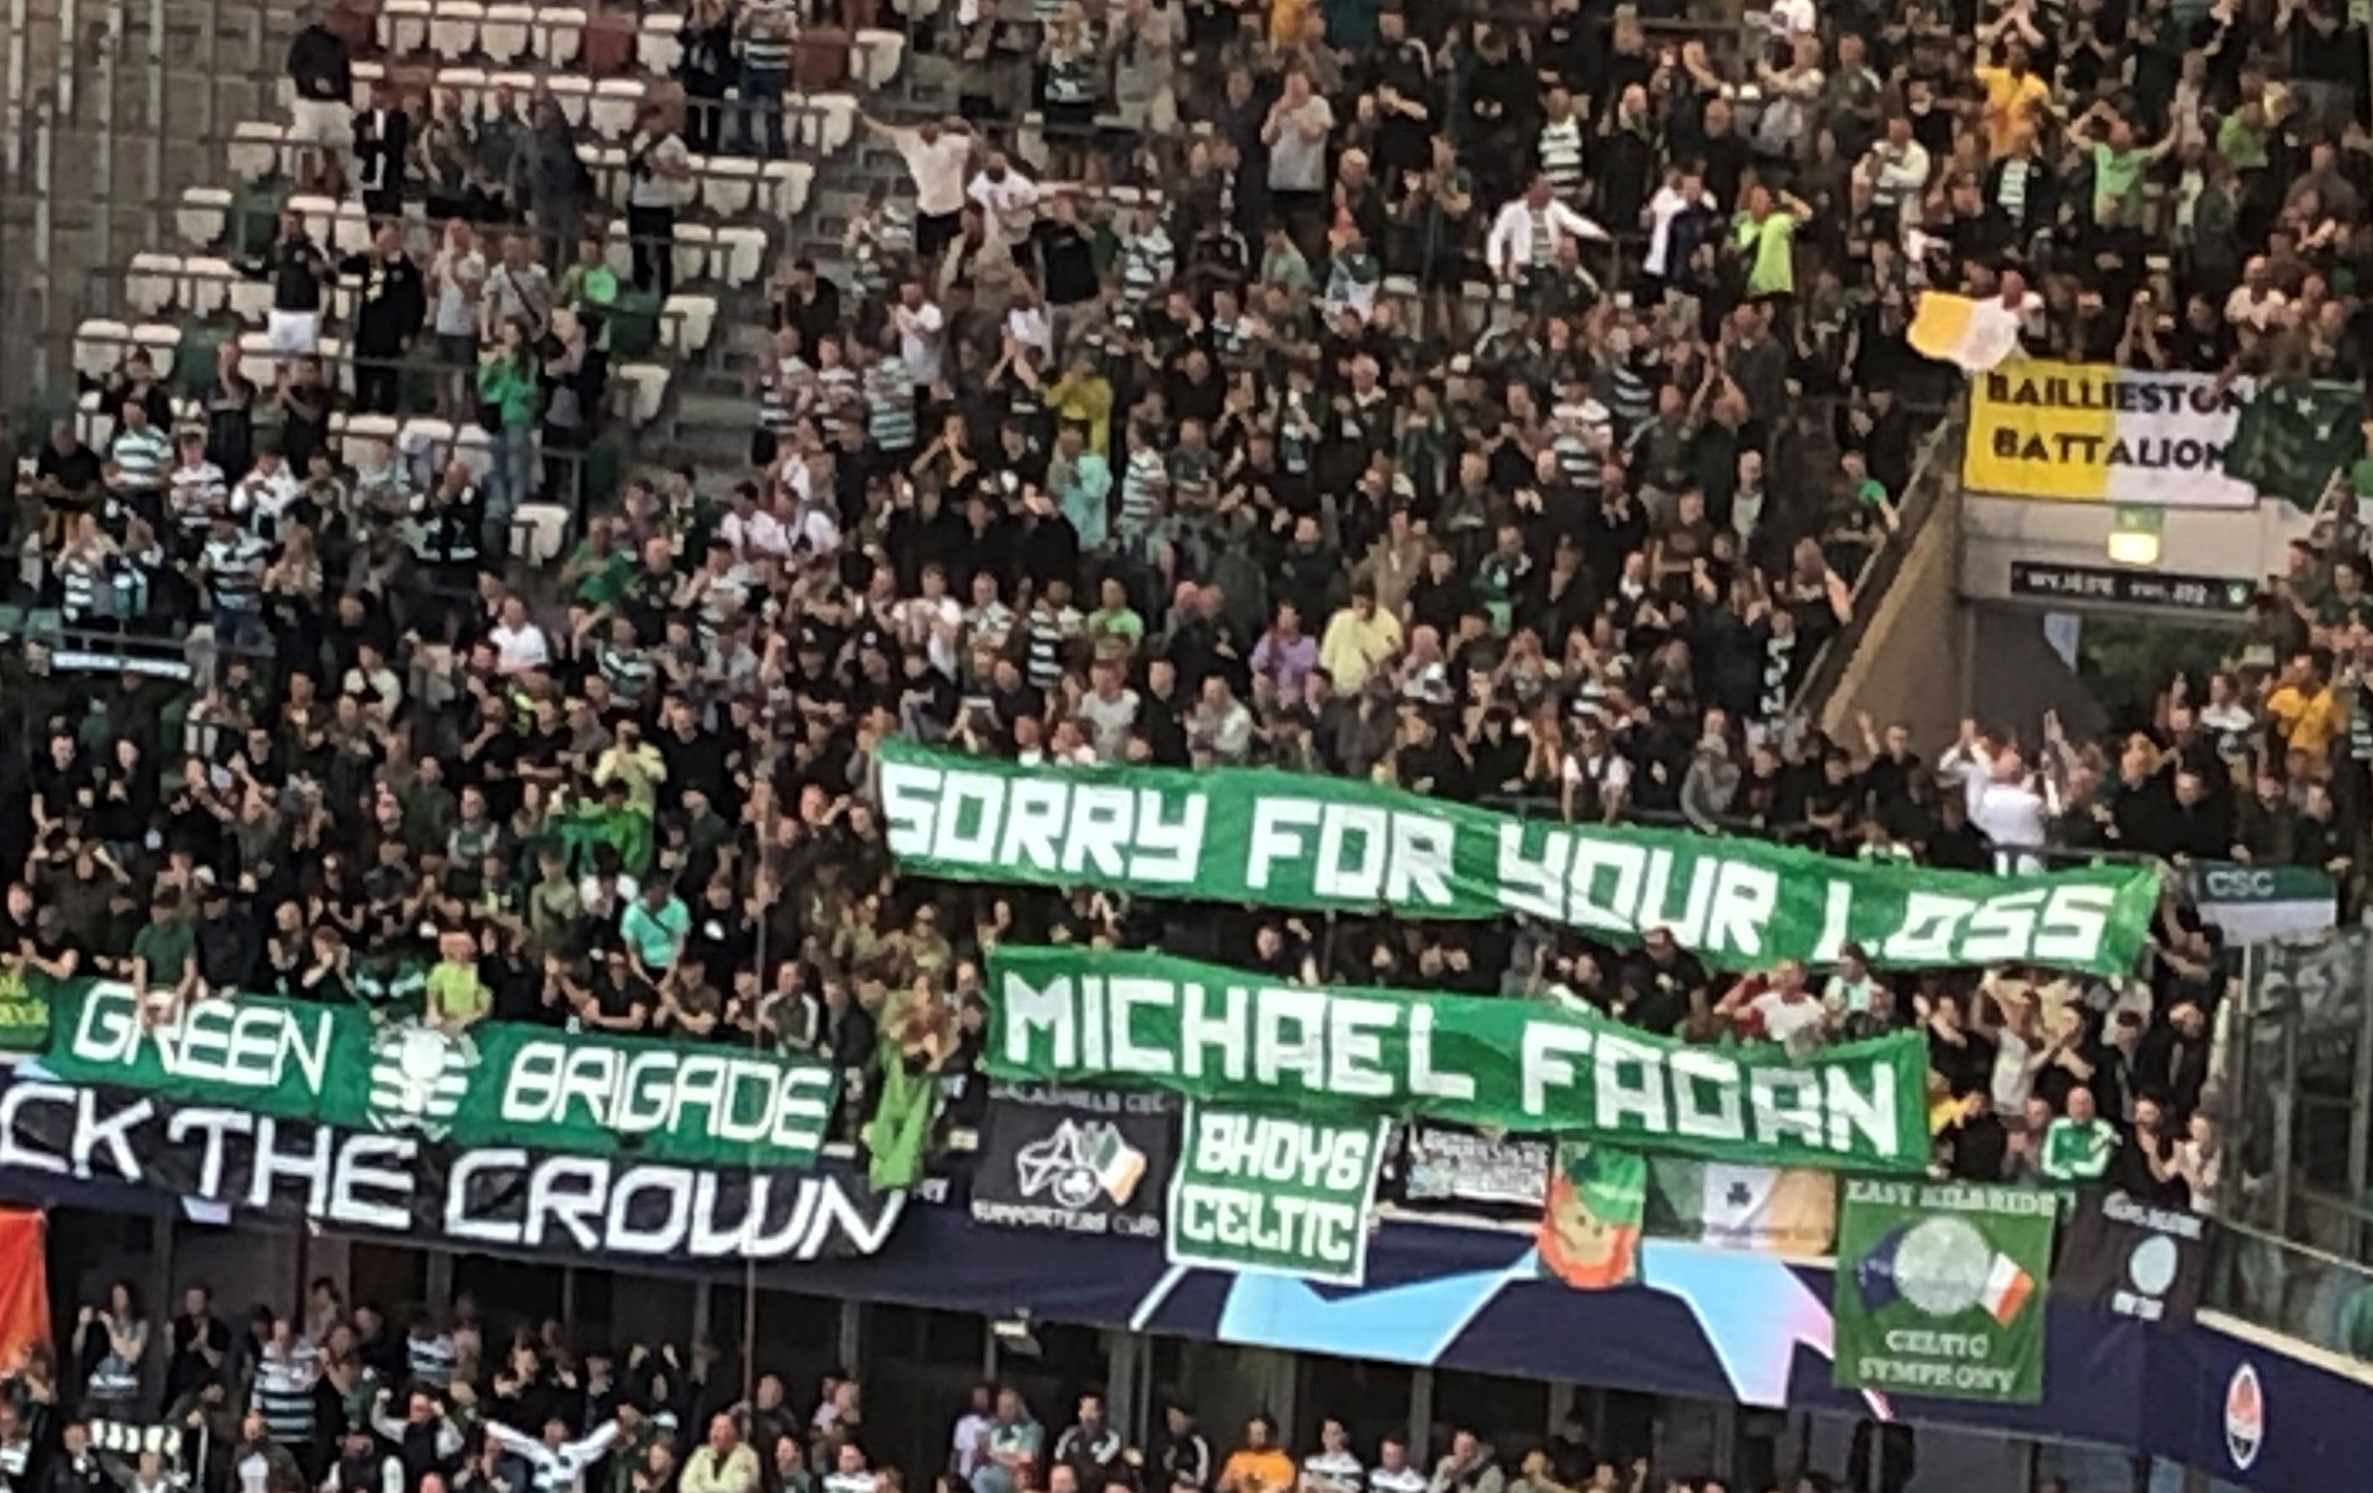 Celtic fanners display anti-monarchy banners